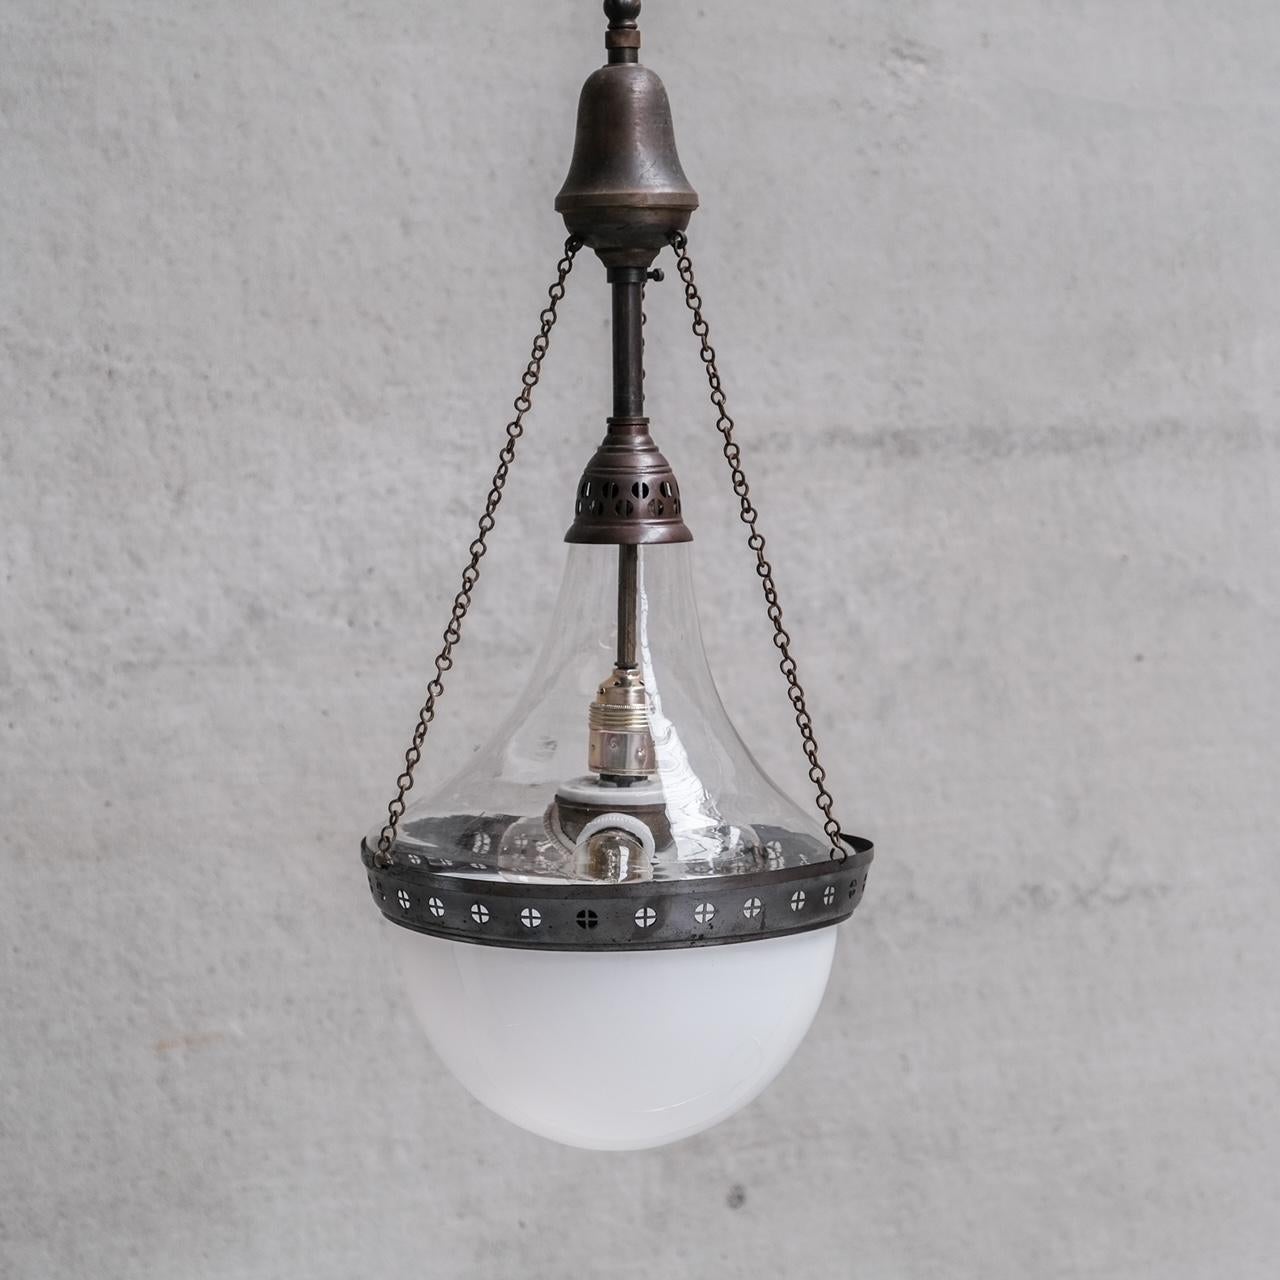 A large two tone pendant lamp. 

France, c1910. 

Exceptional form, with unusual details, from the plafonnier style chains to the coffee bean style decoration around the rim. 

The two styles of glass is a pleasing contrast. 

Naturally patinated.